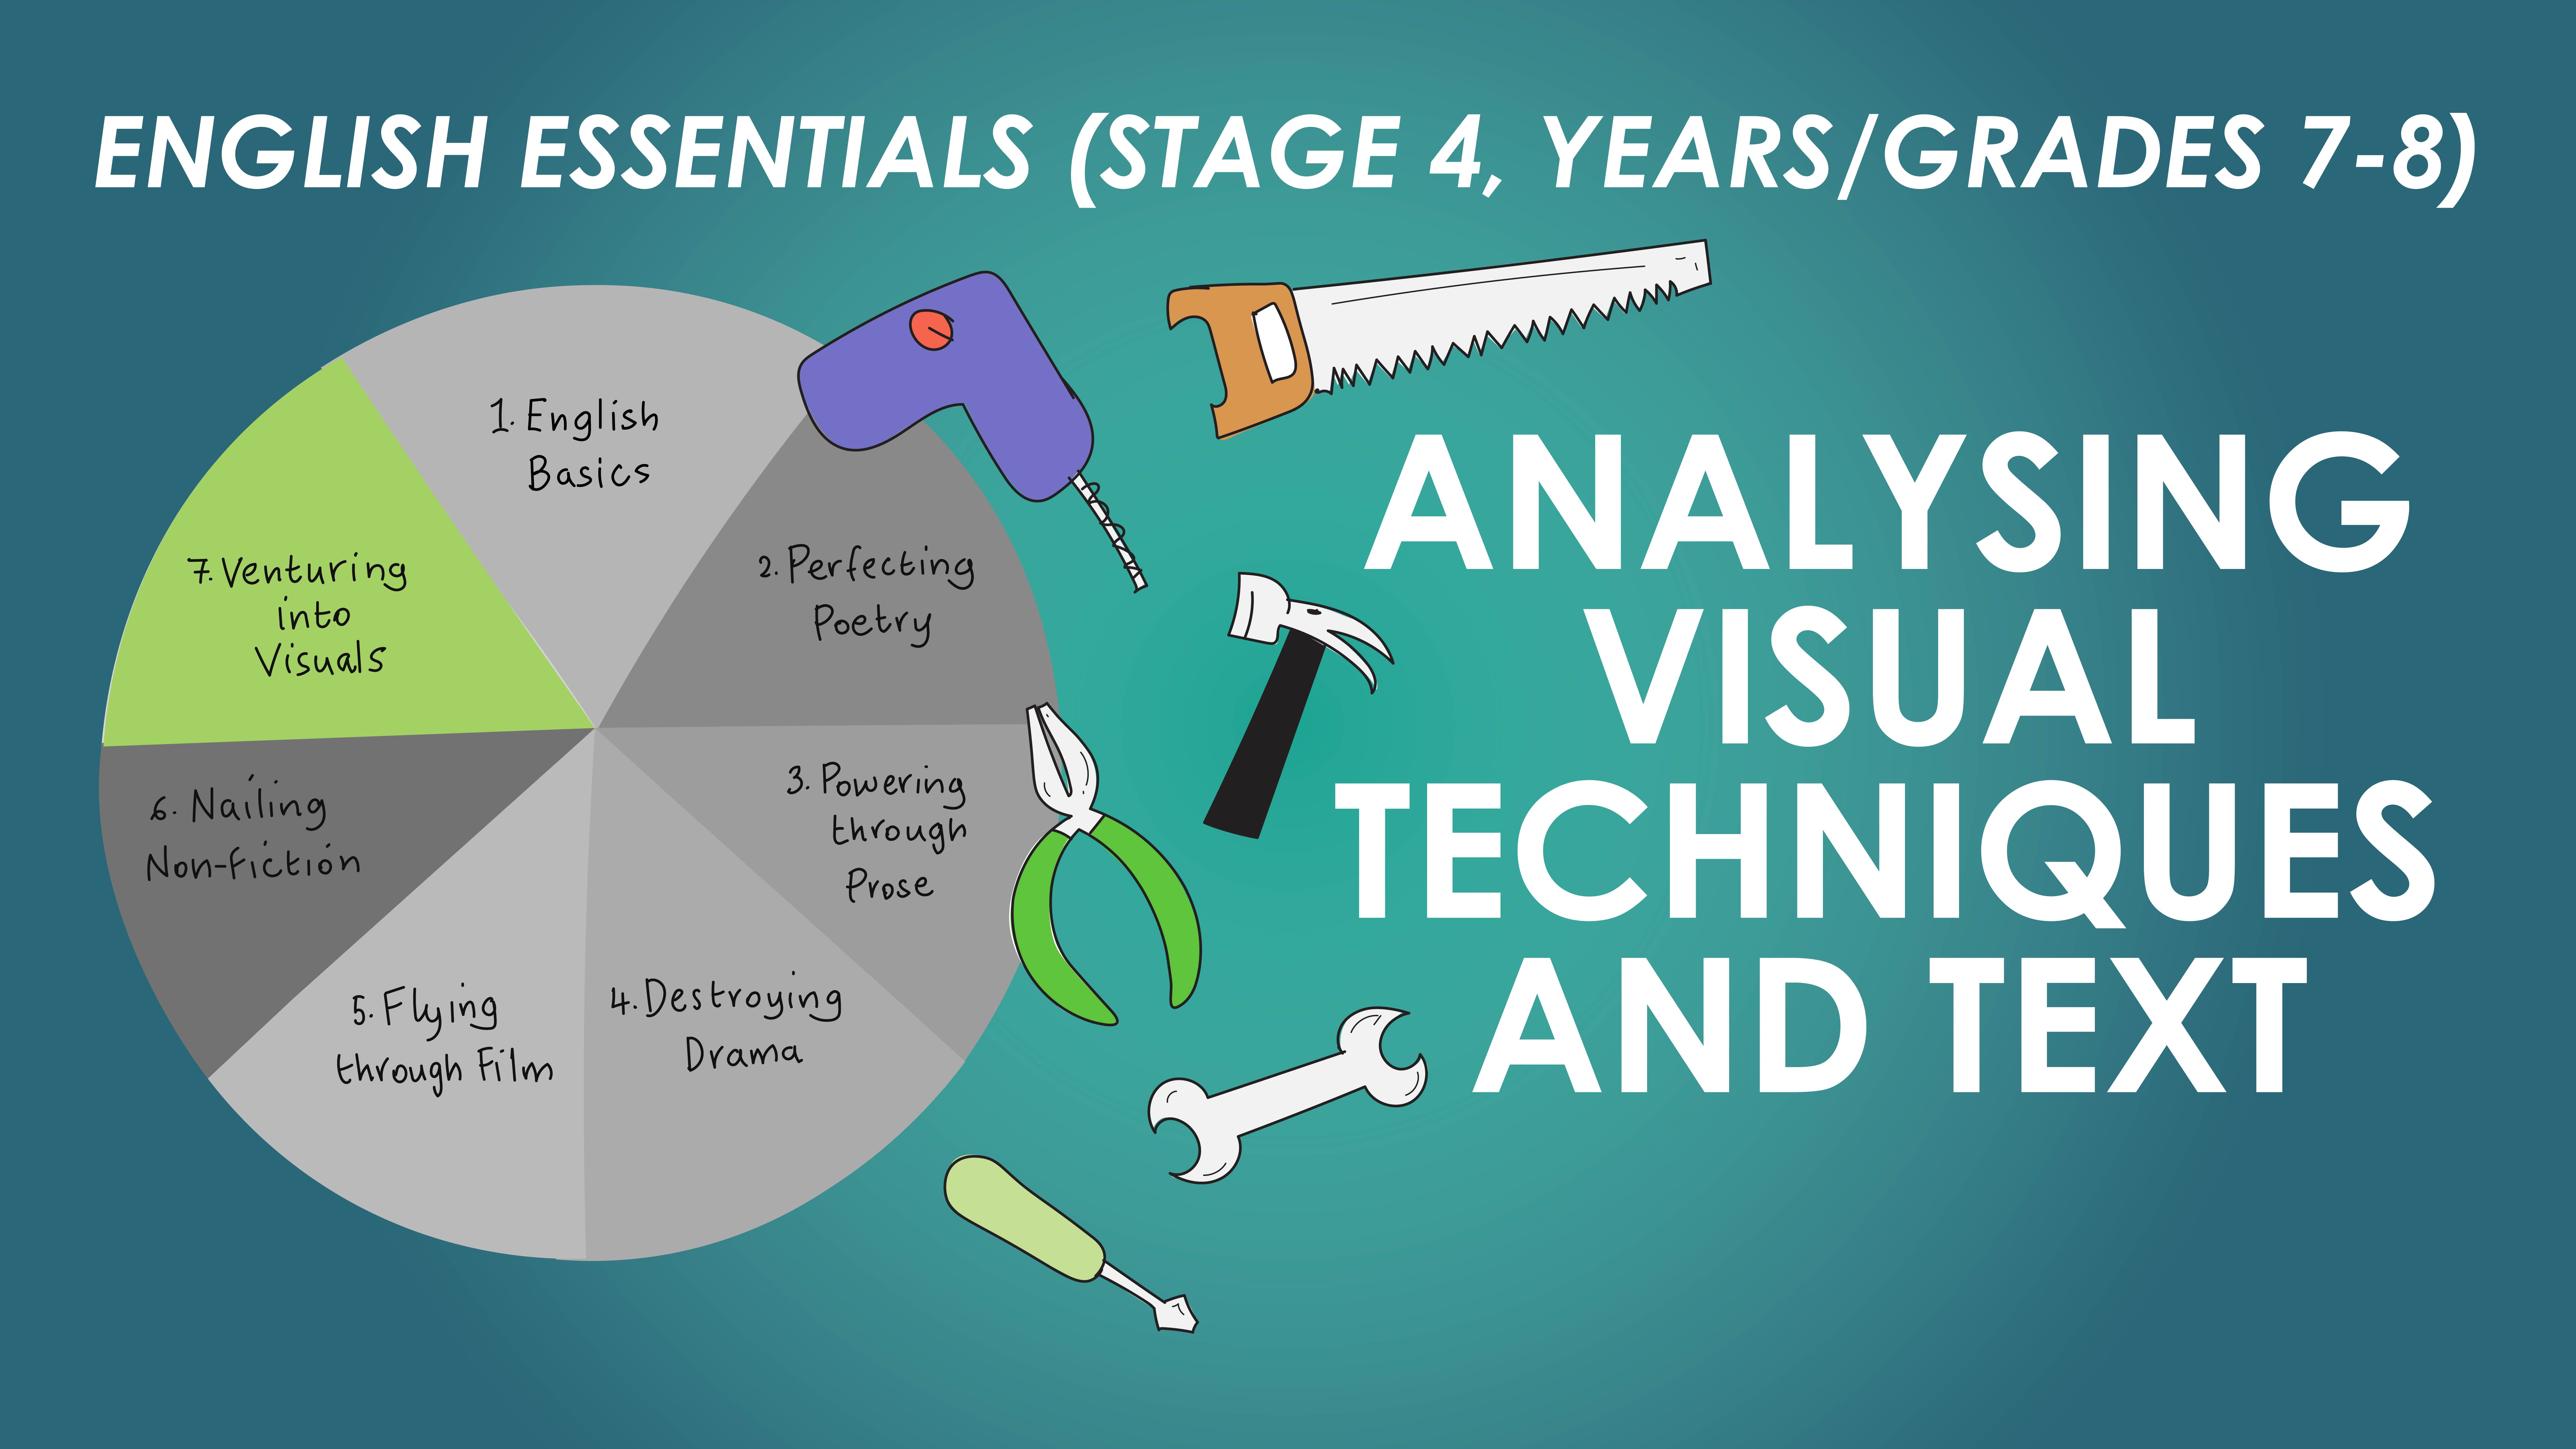 English Essentials - Venturing into Visuals – Analysing Visual Techniques and Text (Stage 4, Years/Grades 7-8)